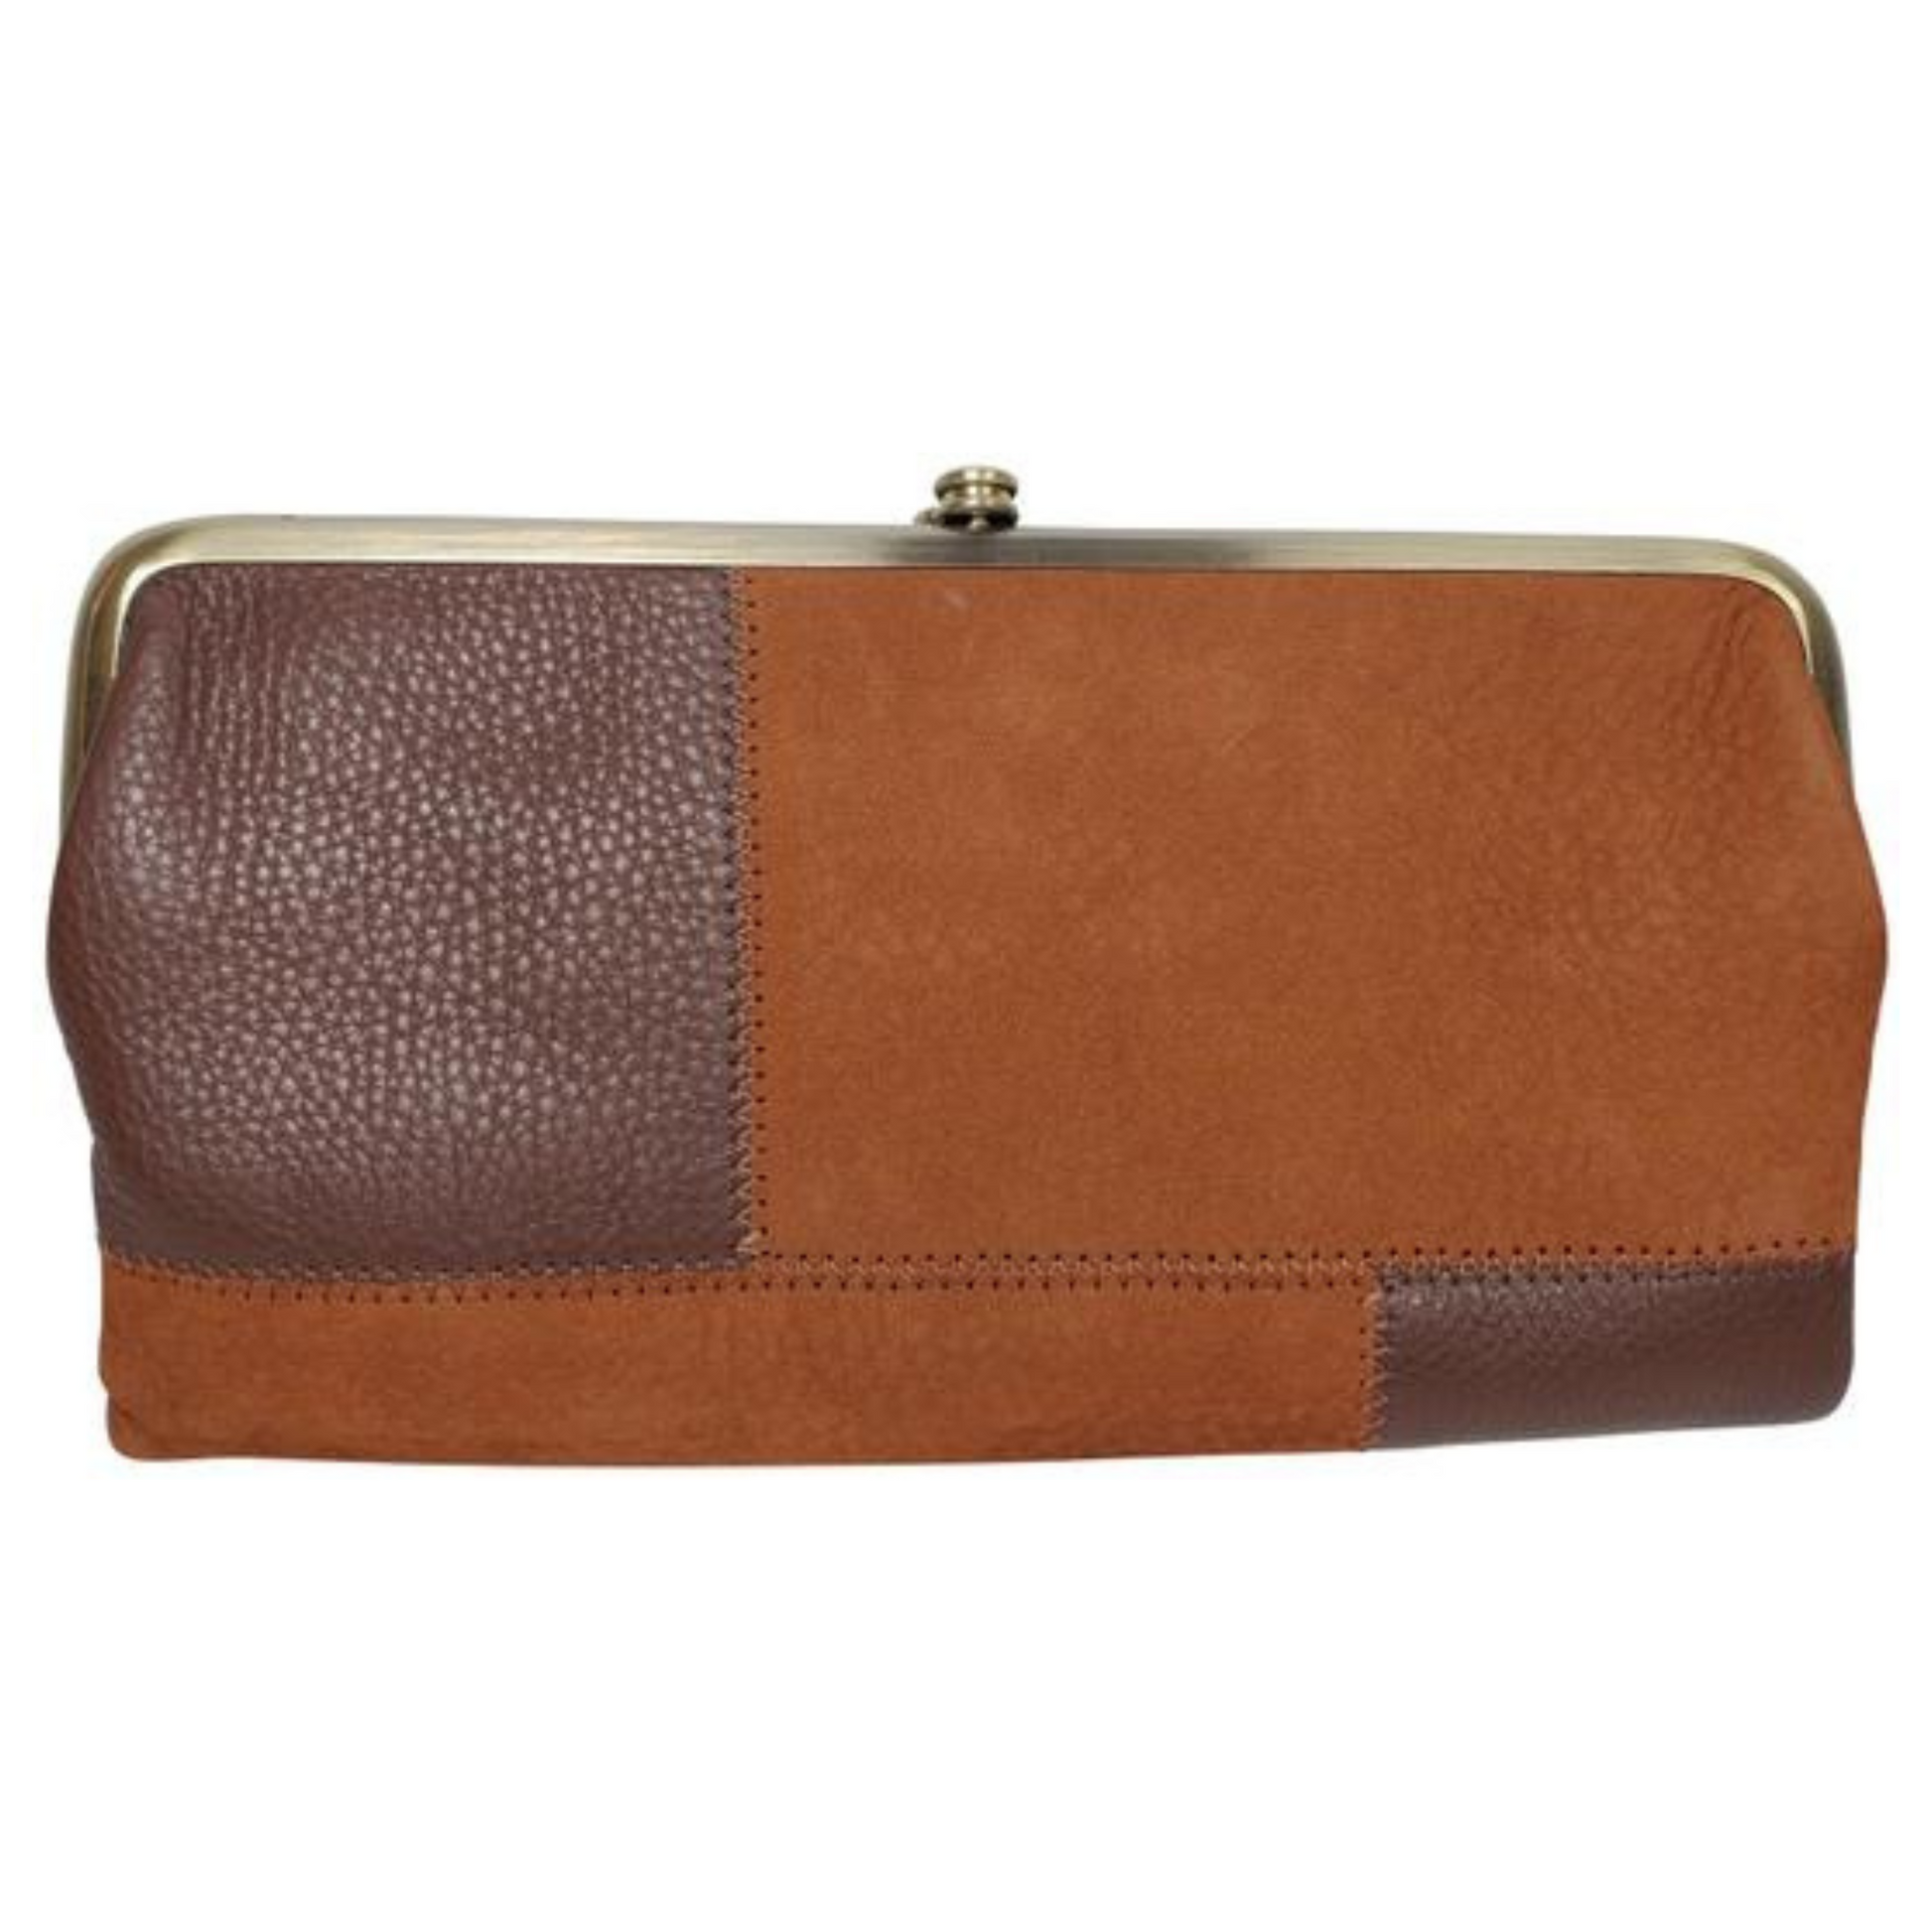 A brown leather wallet in the colour tobacco.